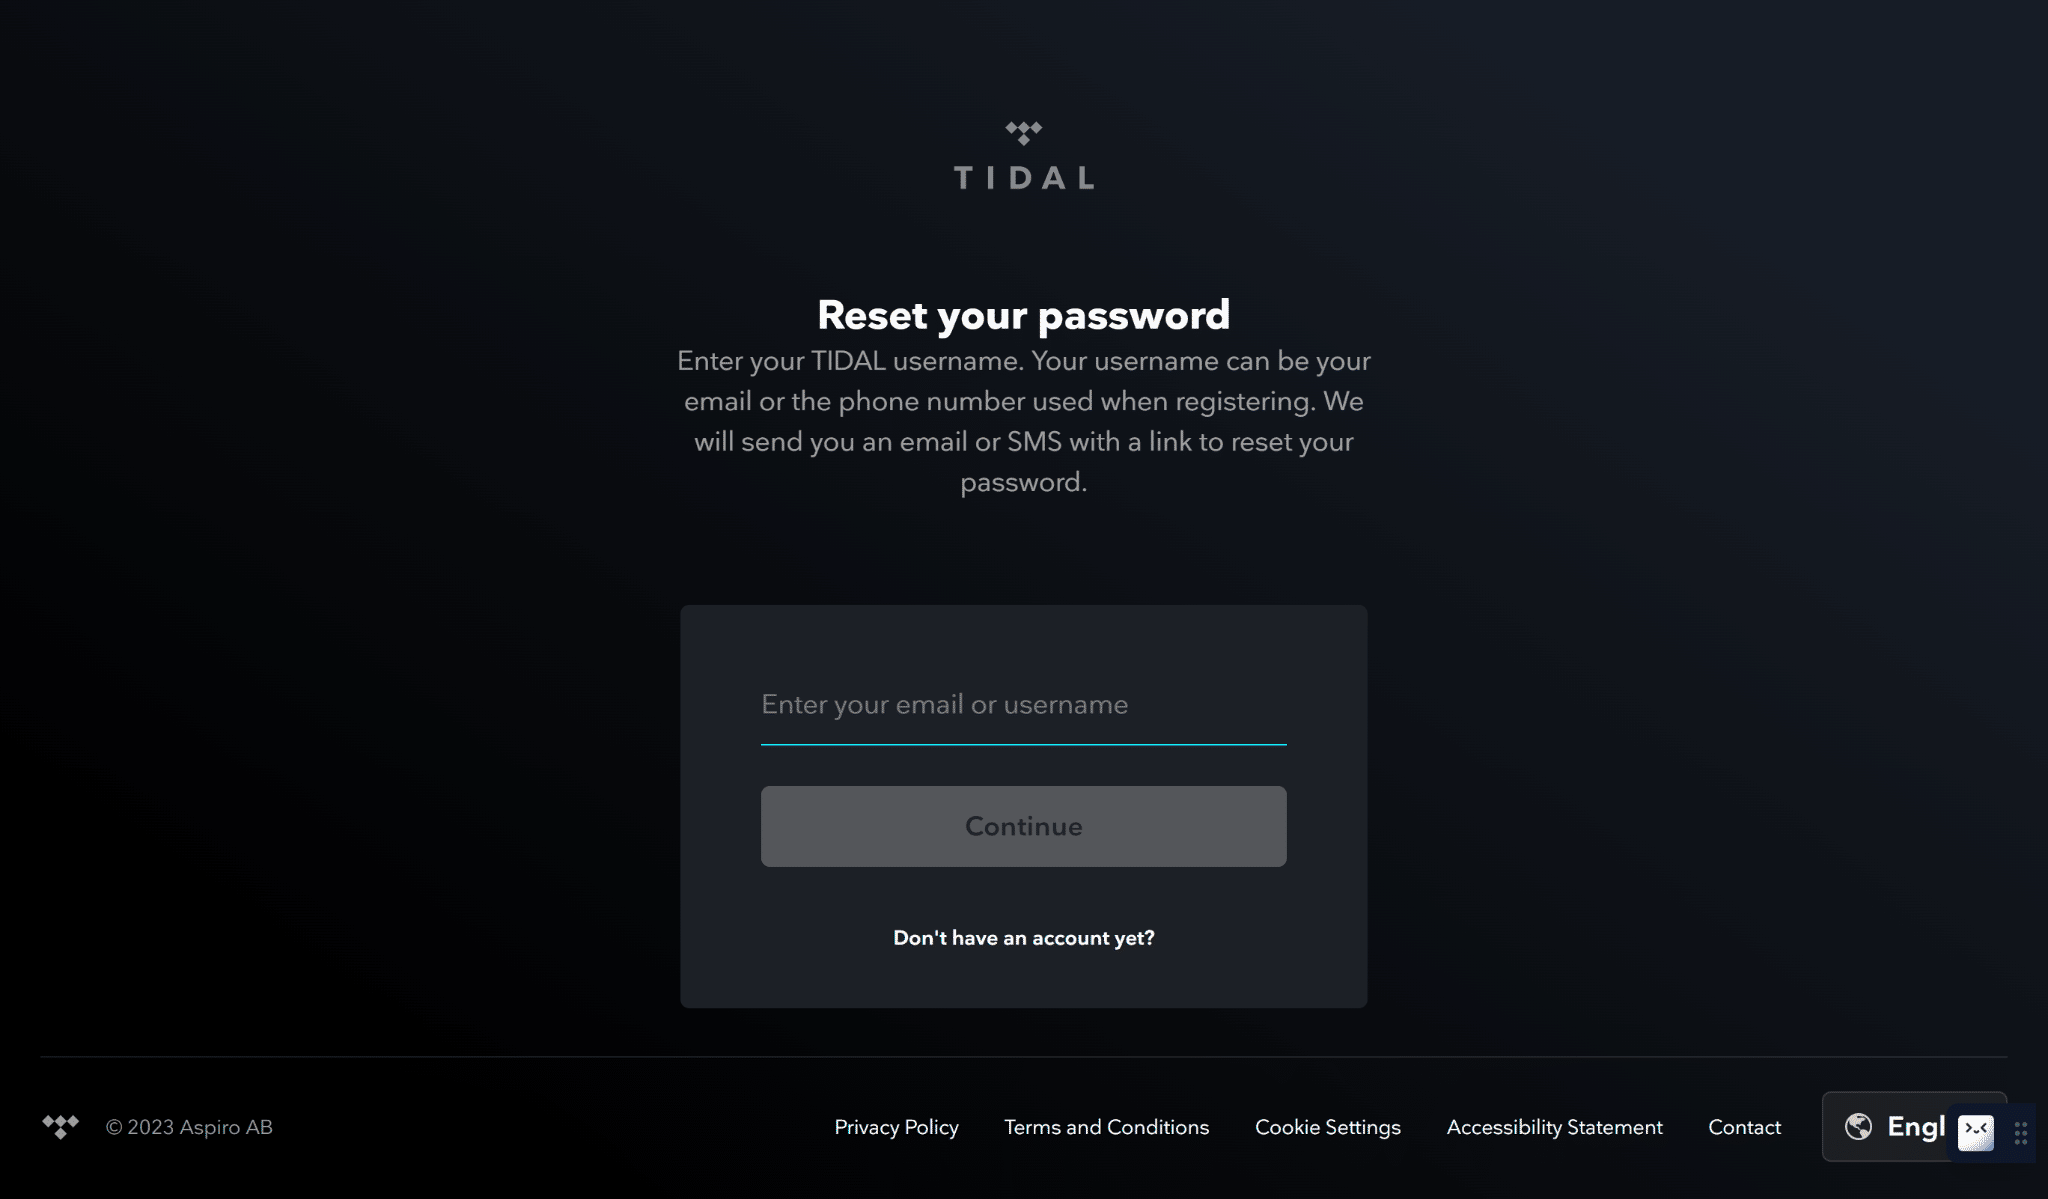 Reset Your Password to Fix TIDAL Can't Log In or Something Went Wrong to fix TIDAL can't log in or sign in, Something Went Wrong, Login Failed, Network Error